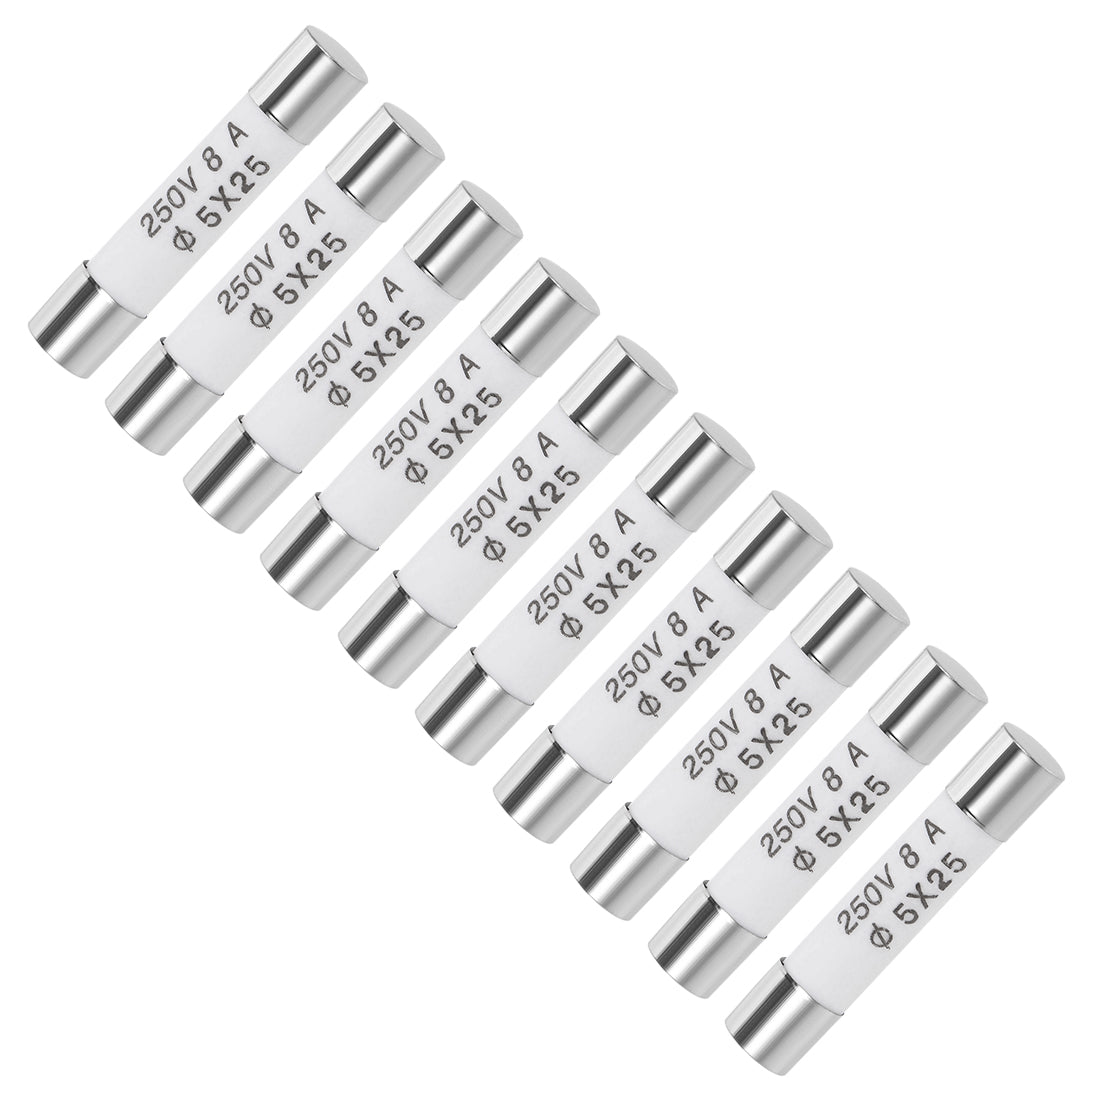 uxcell Uxcell Cartridge Fuses 8A 250V 5x25mm Fast Blow Audio Alarm Amplifier Ceramic 10pcs